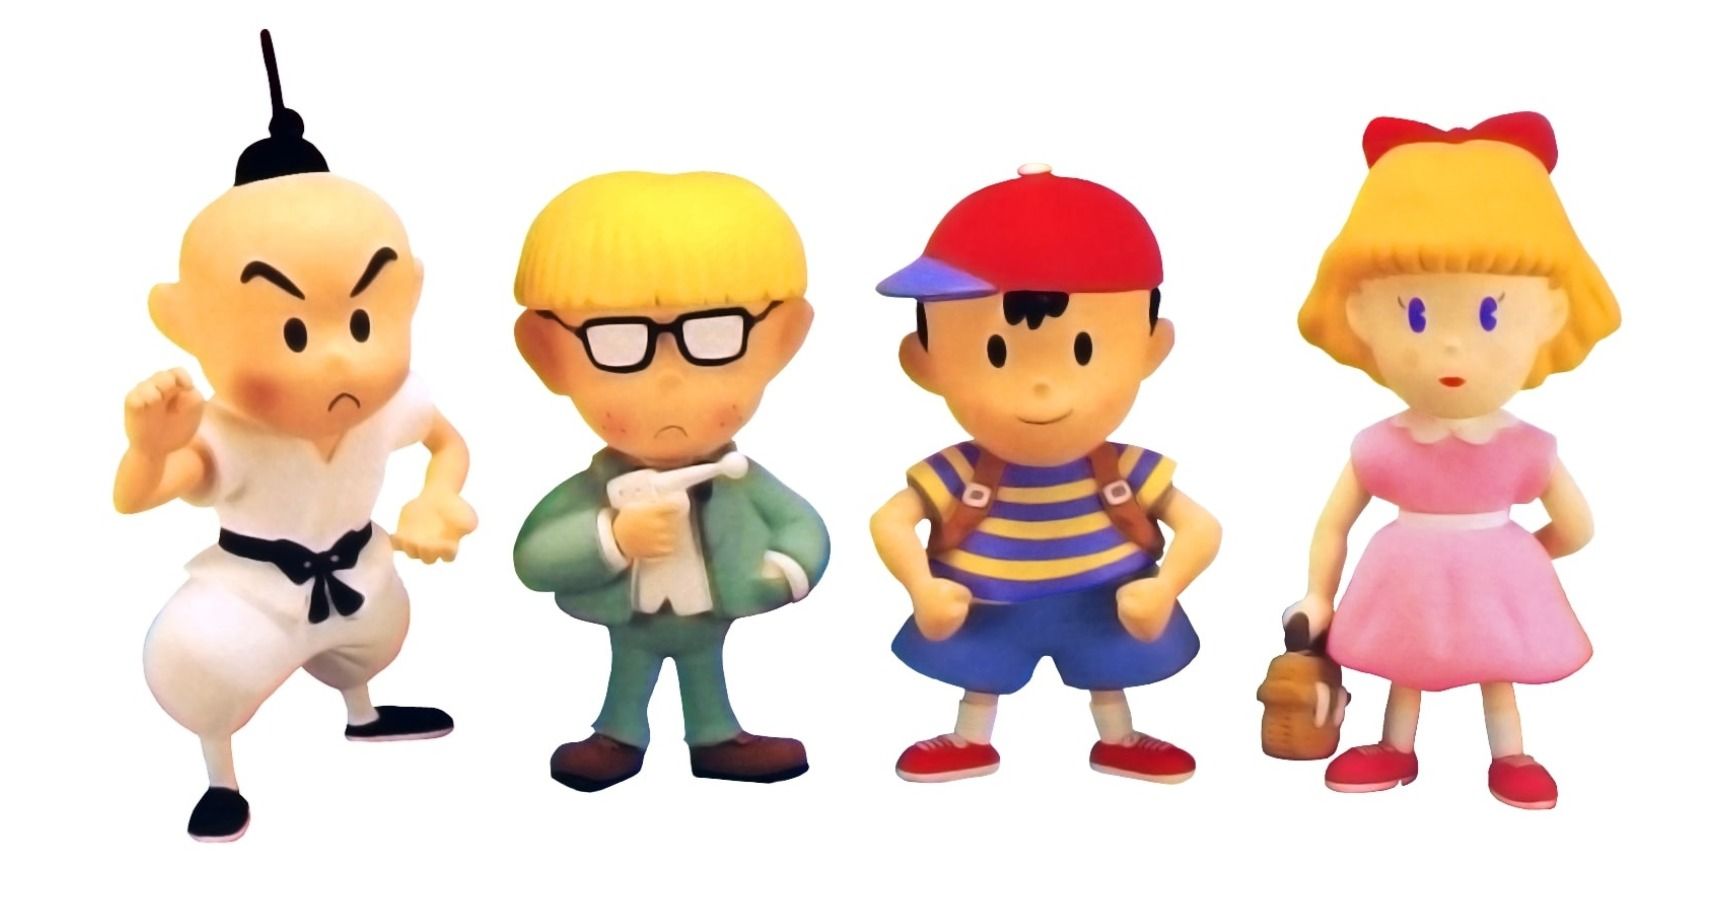 EarthBound Cover